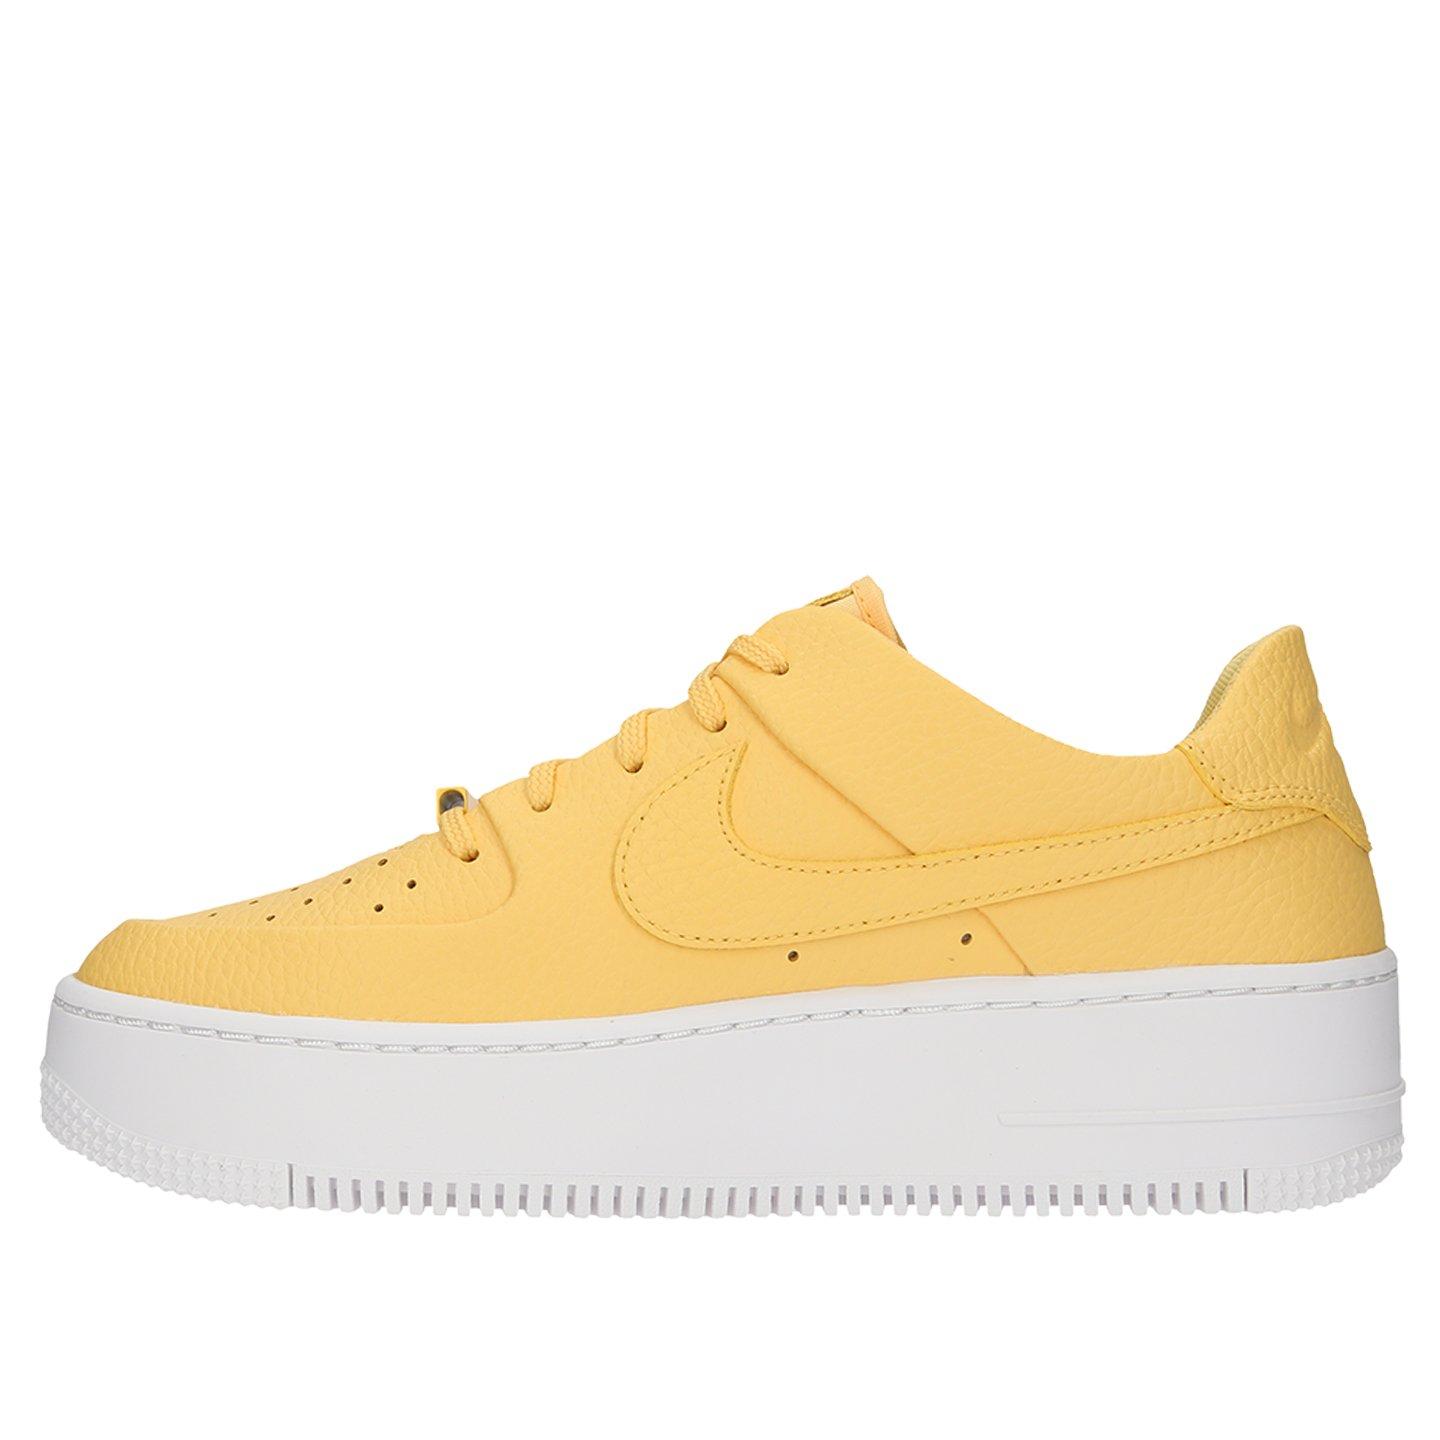 Nike Leather Air Force 1 Sage Trainers in Yellow (Metallic) - Lyst